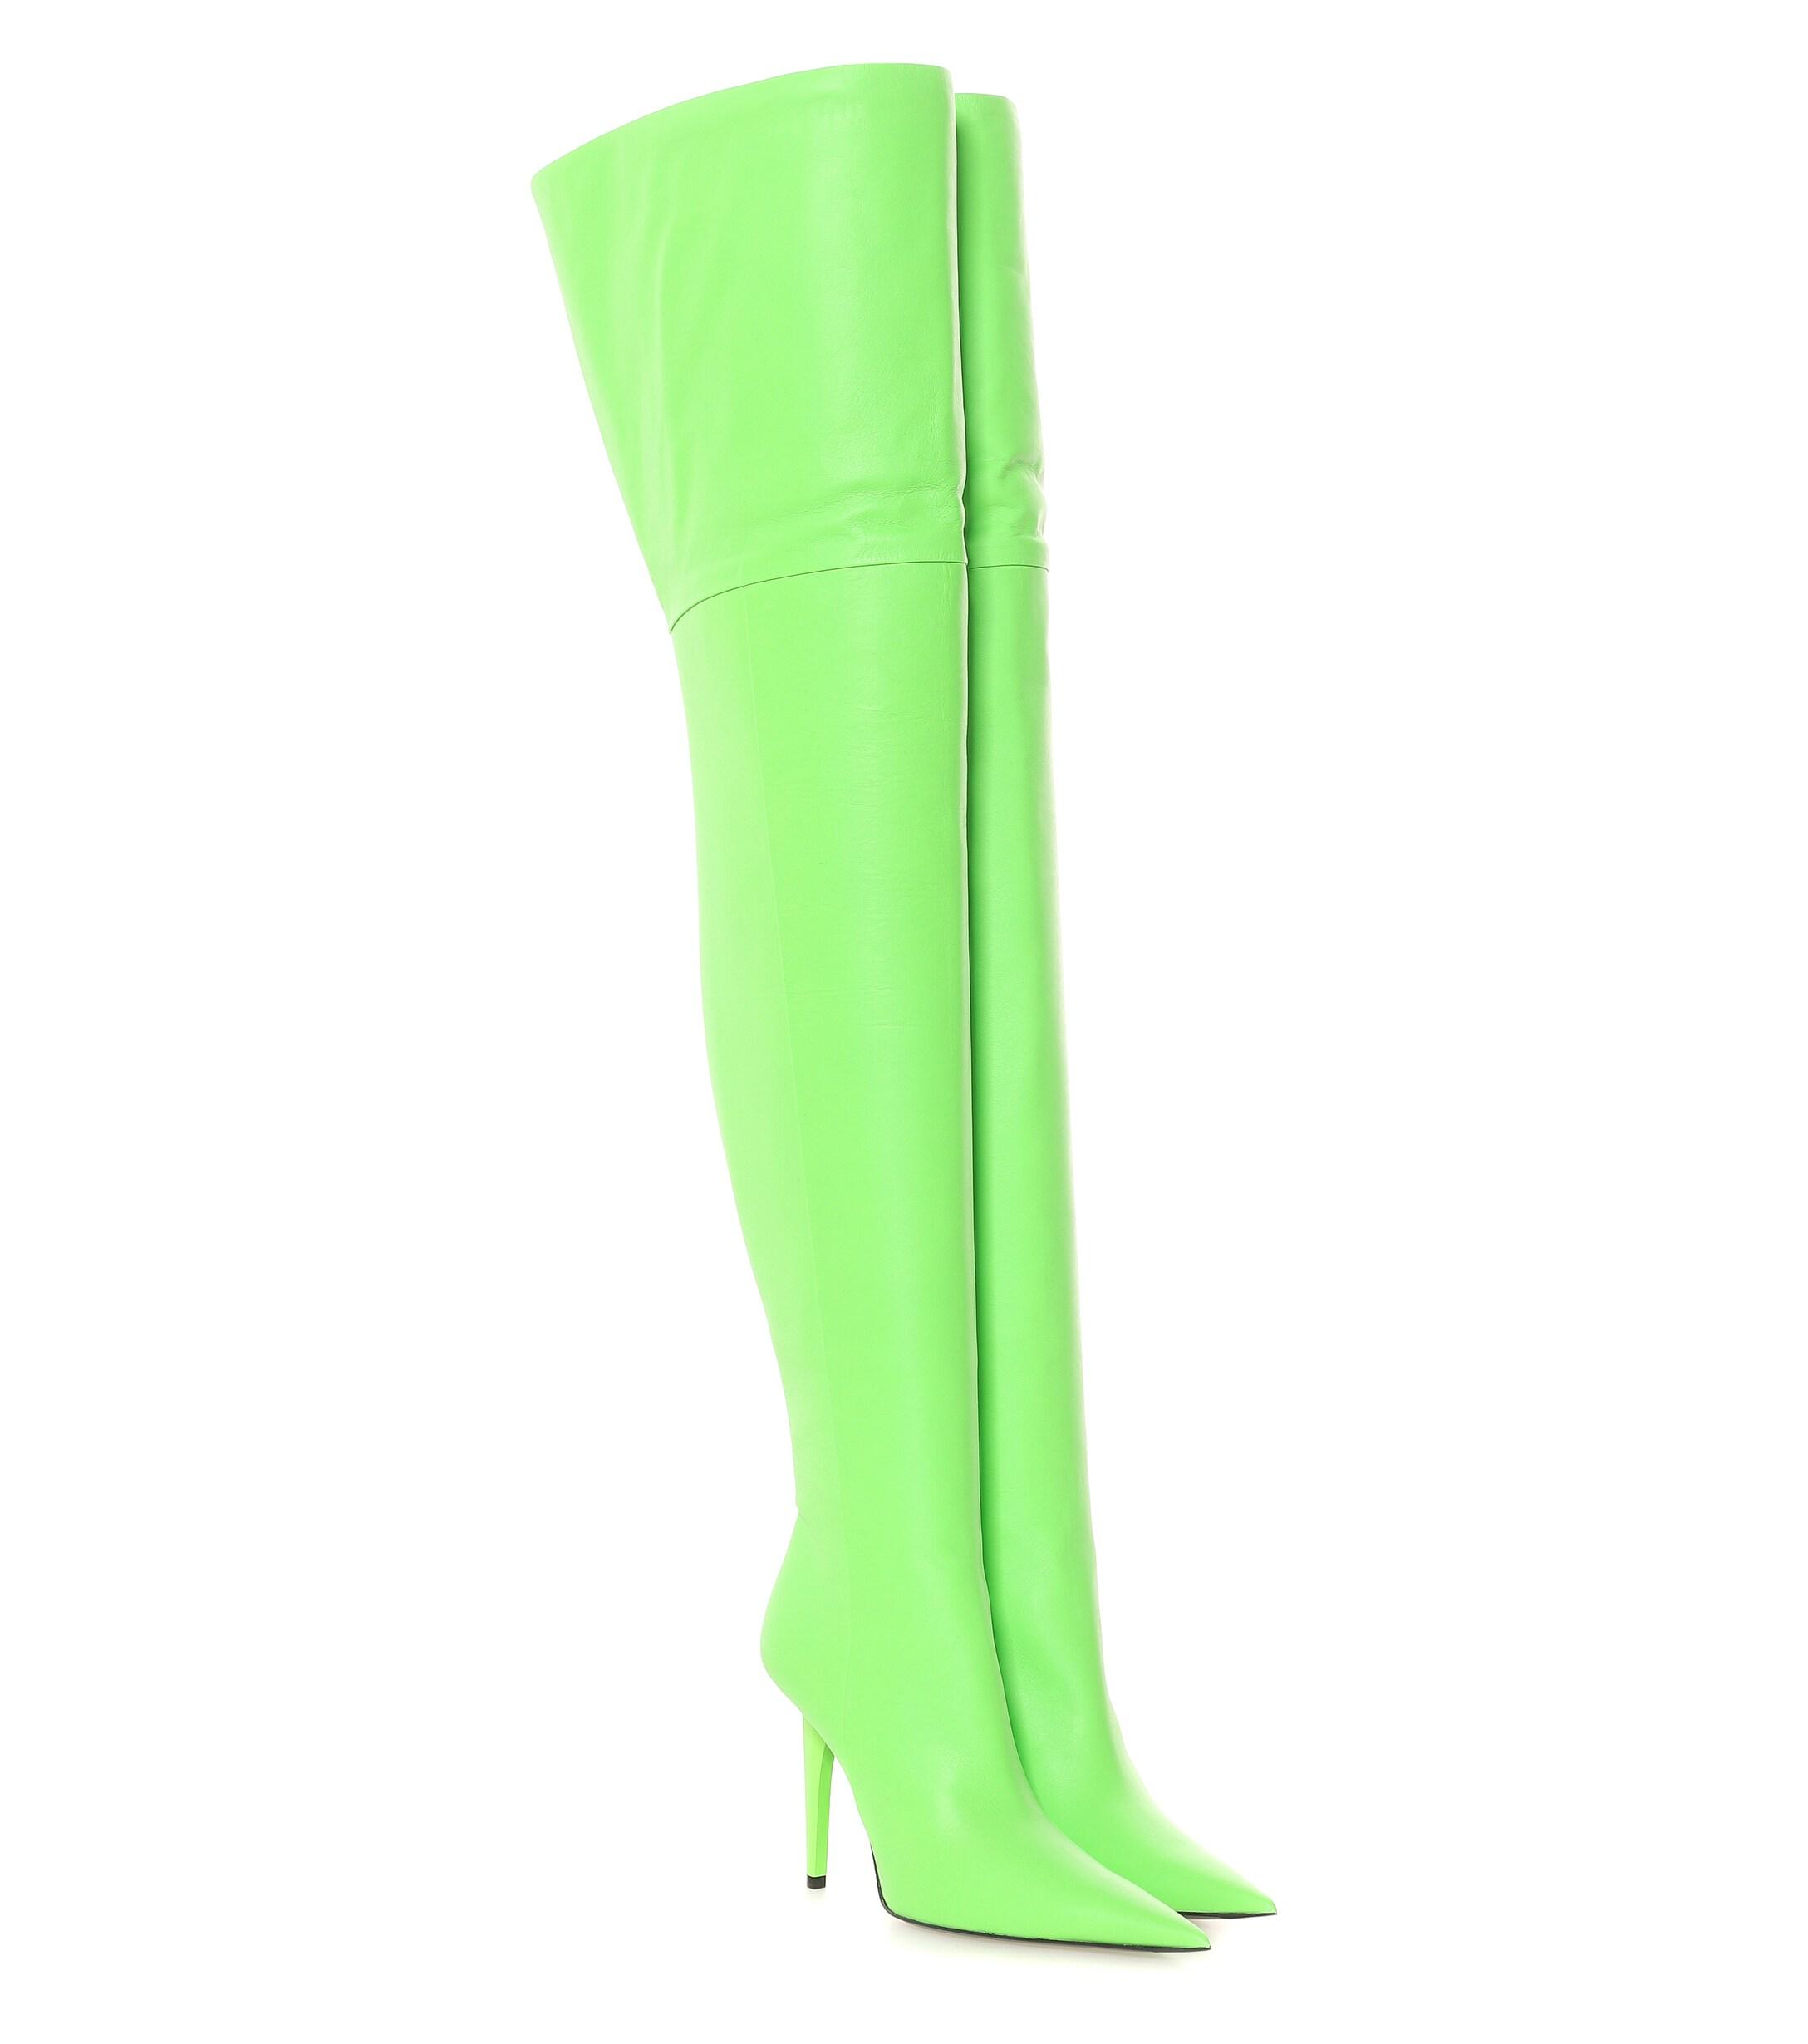 Balenciaga Knife Shark Over-the-knee Leather Boots in Green - Lyst